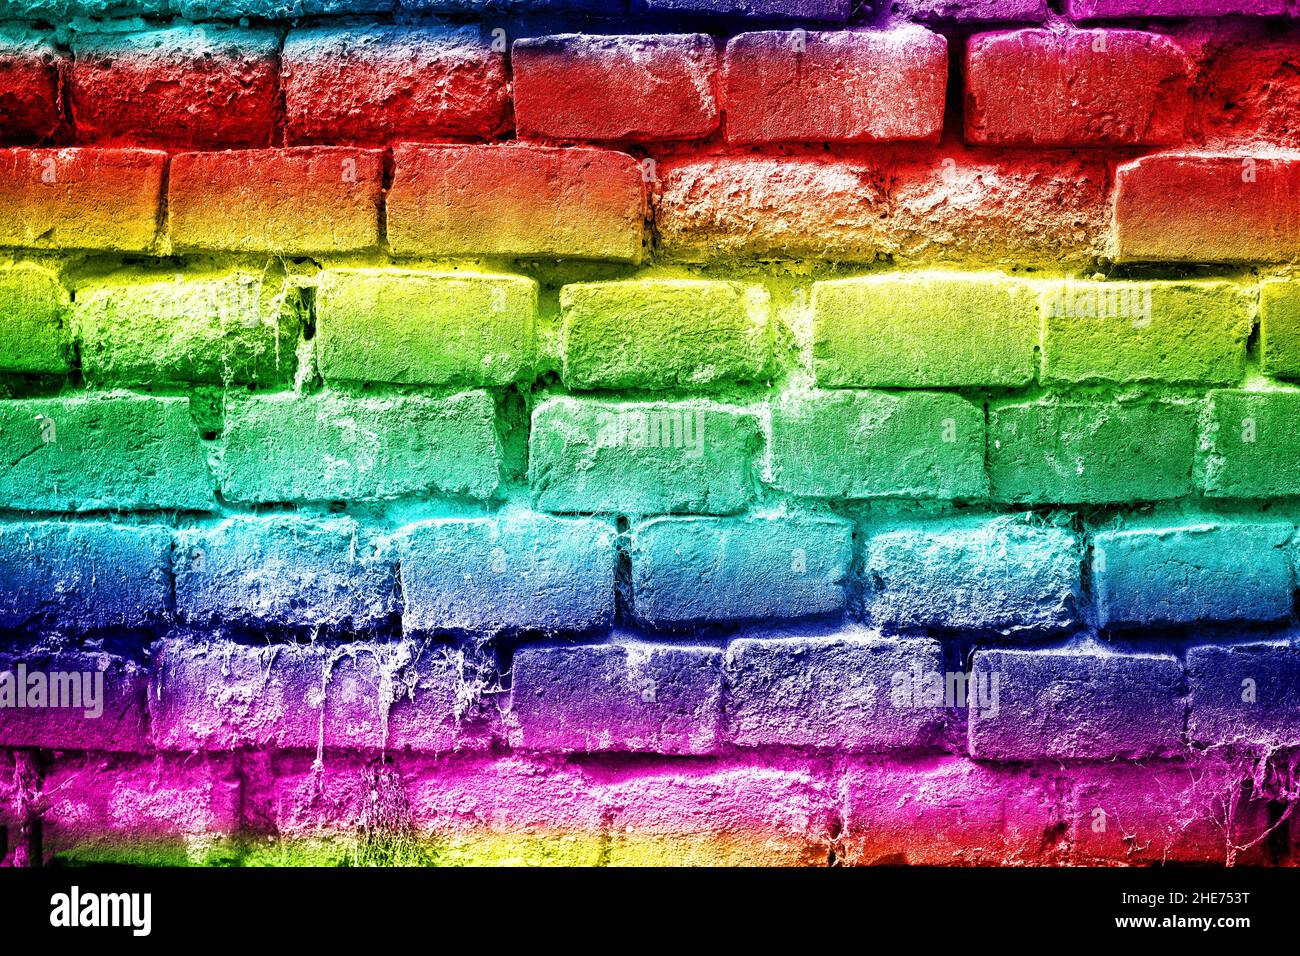 Abstract rainbow colors brick wall background view, red, yellow, green, blue Stock Photo